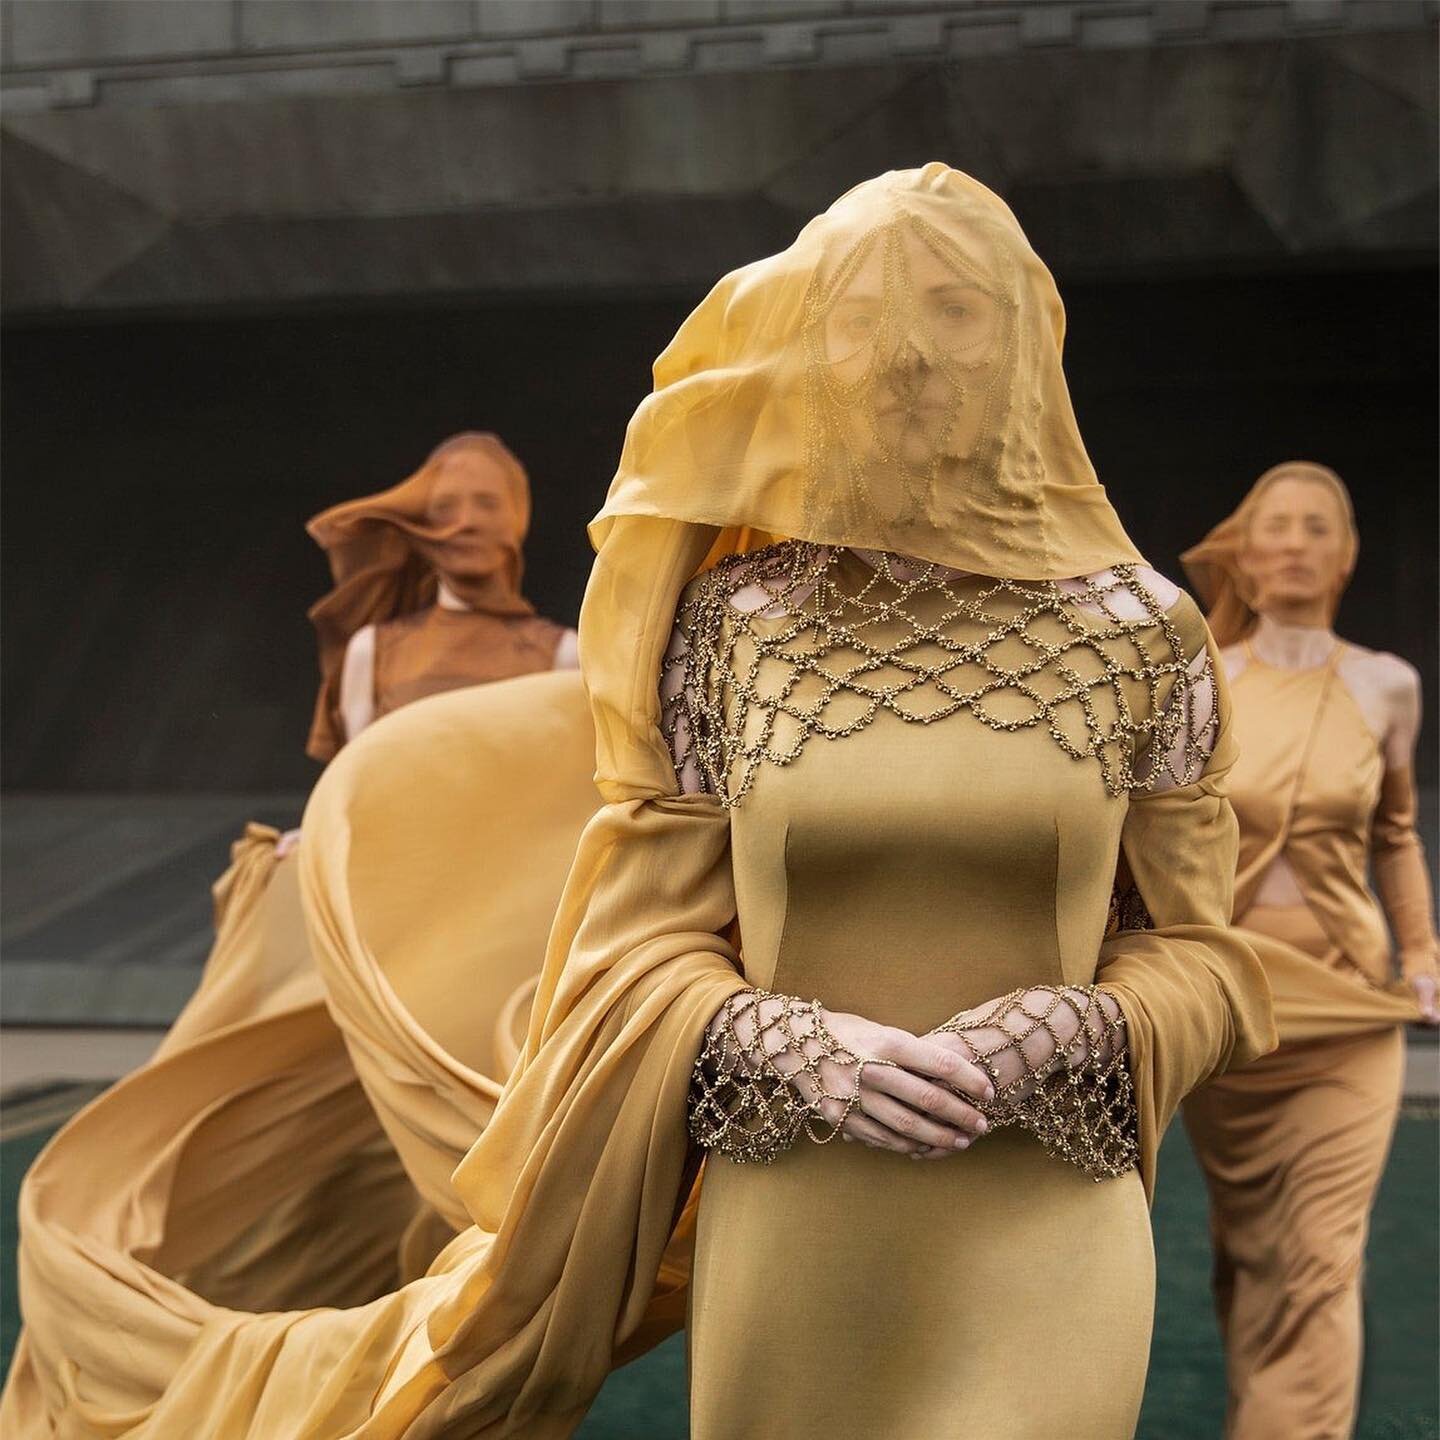 The stunning costumes of Dune (2021), designed by Jacqueline West and Bob Morgan. Intricate, sumptuous work bringing the people of Arrakis, House Atreides, and House Harkonnen to life onscreen. Read my full review of the new Denis Villeneuve epic via